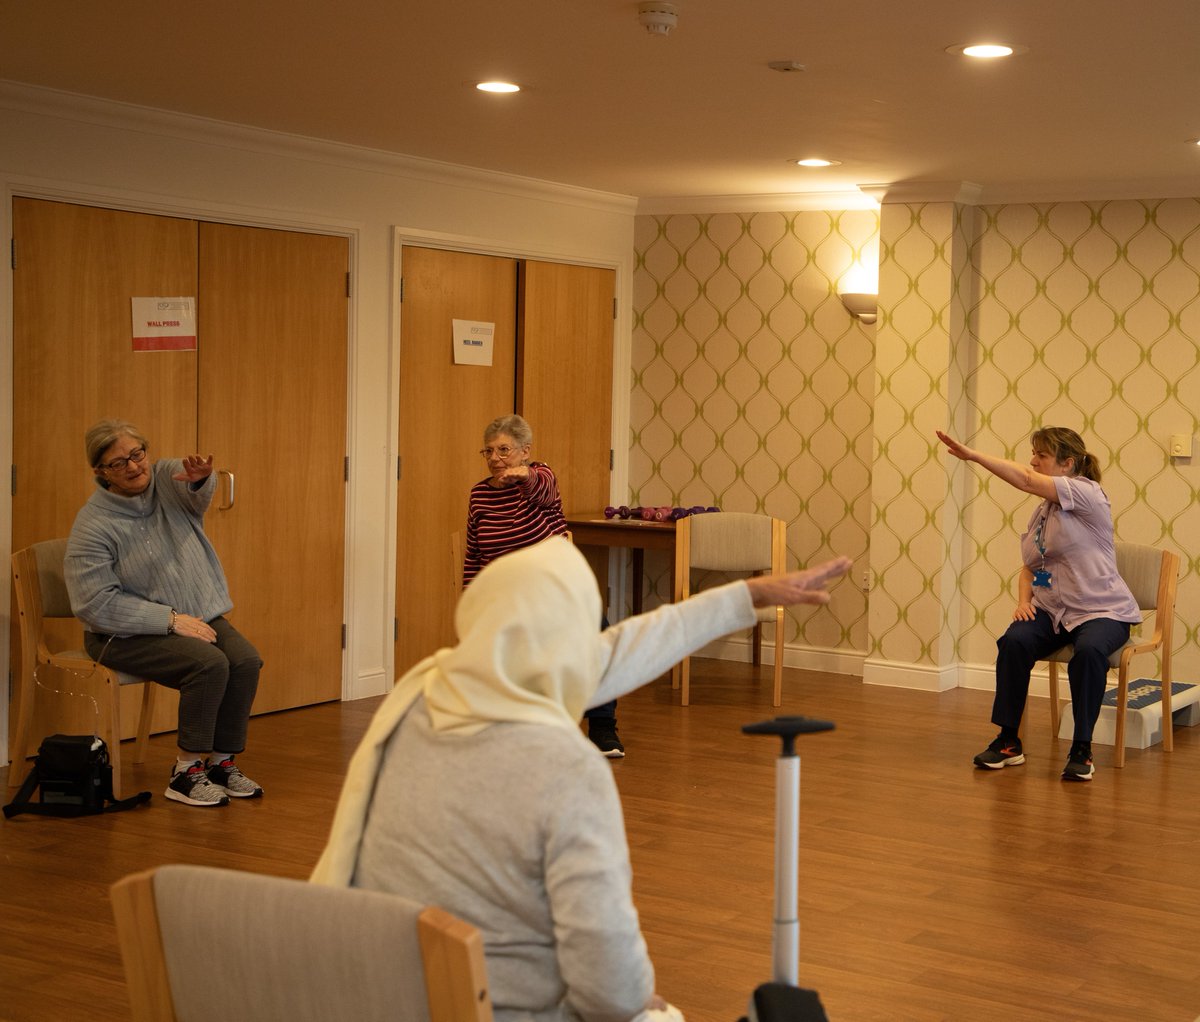 “I’ve got breathing problems and I love coming to the exercise sessions, I’ve met other ladies and I really enjoy it.' Read about how our Pulmonary Rehabilitation Team are improving the lives of people through their regular exercise classes. Full story: bit.ly/3xDCbrm